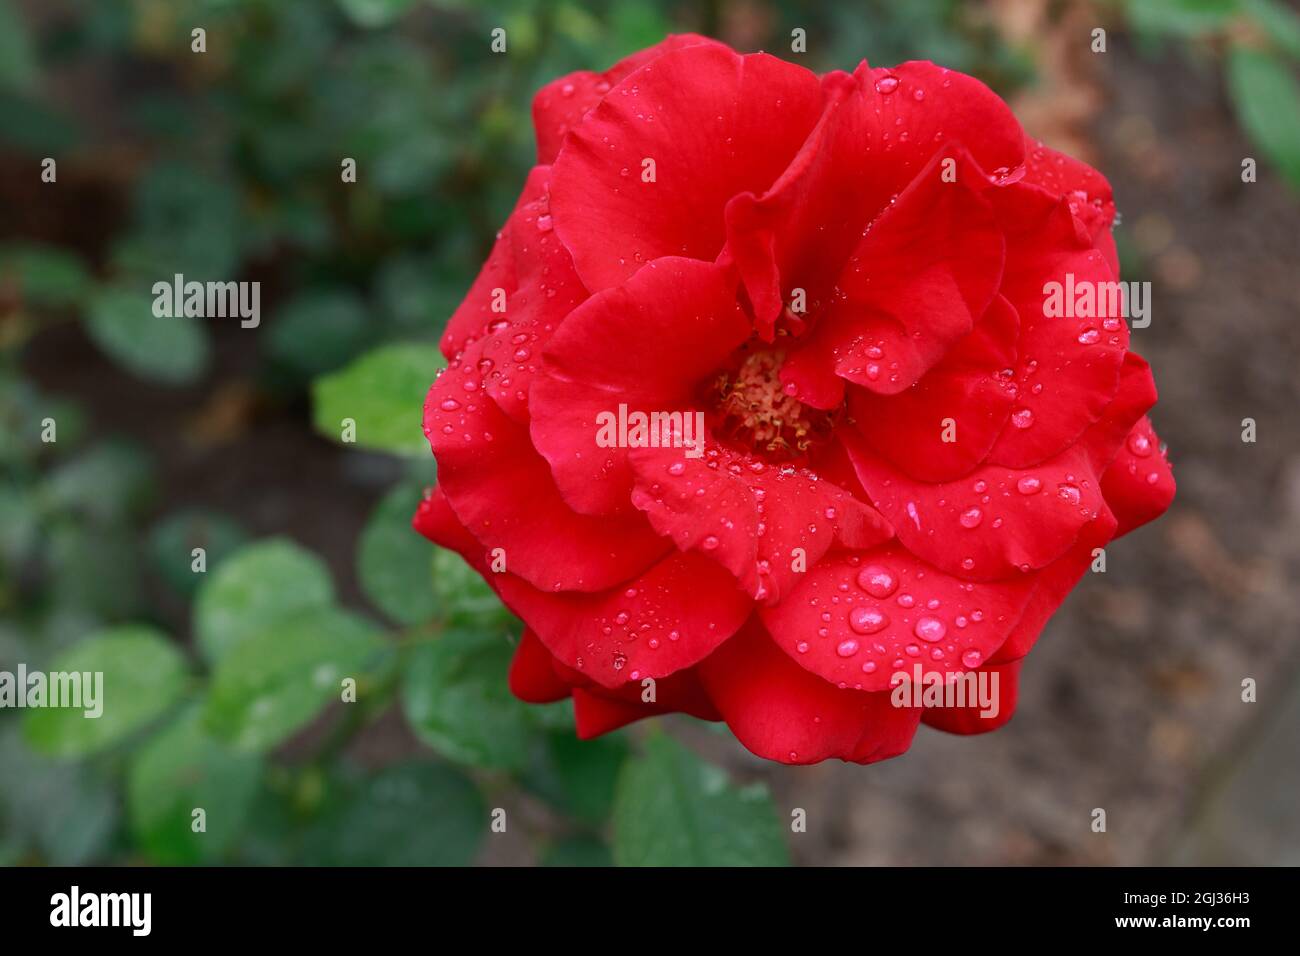 Beautiful red rose in a garden after rain Stock Photo